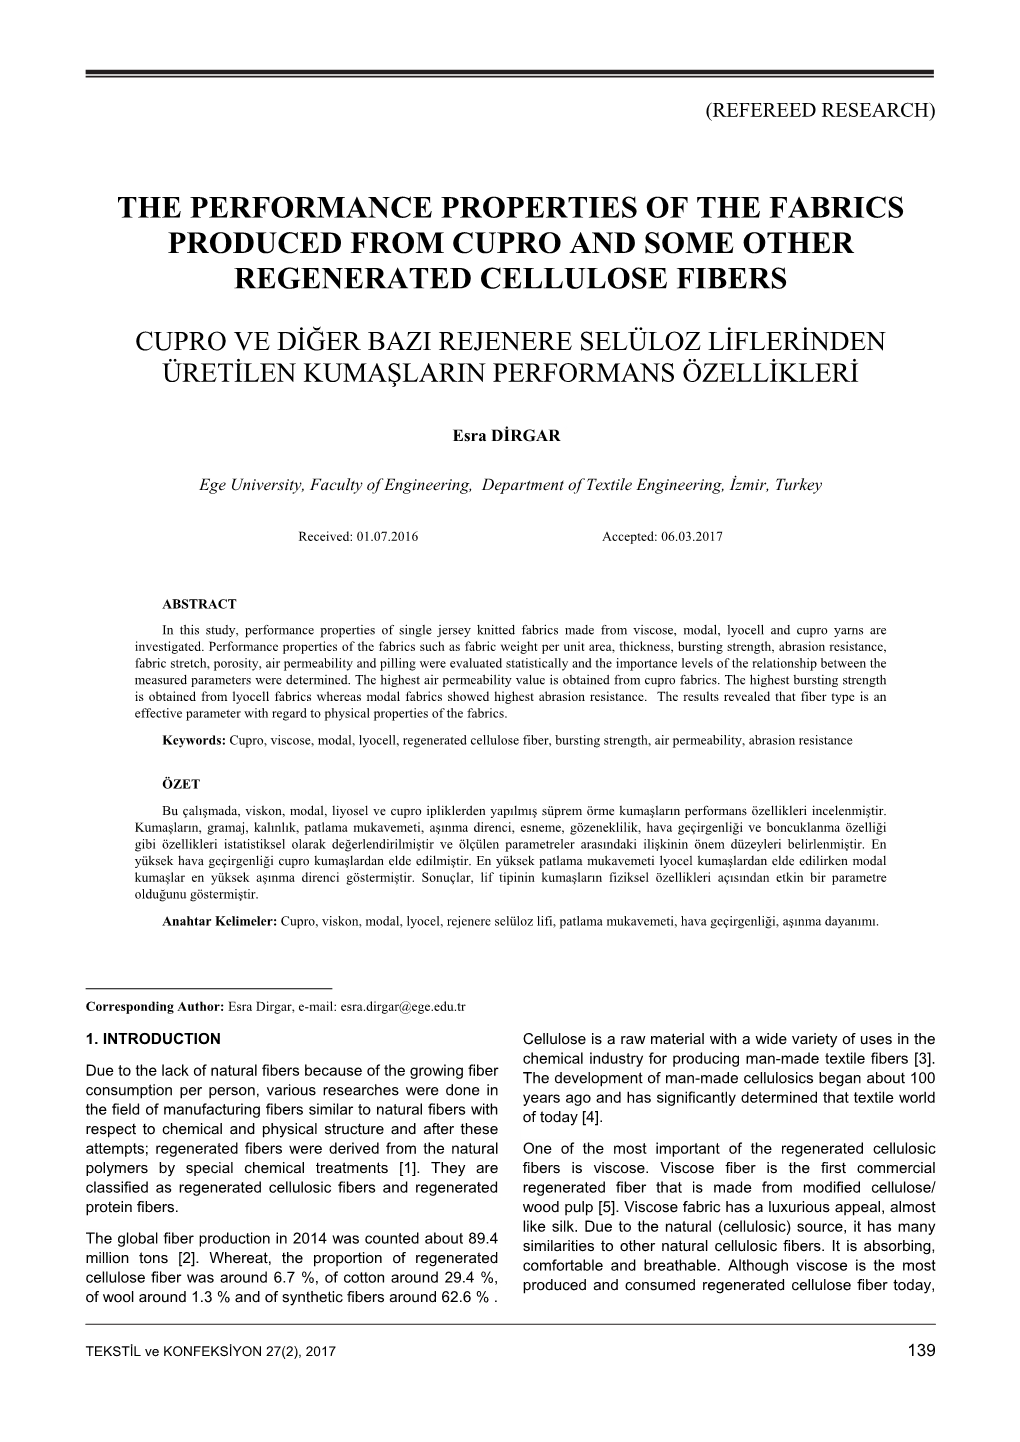 The Performance Properties of the Fabrics Produced from Cupro and Some Other Regenerated Cellulose Fibers